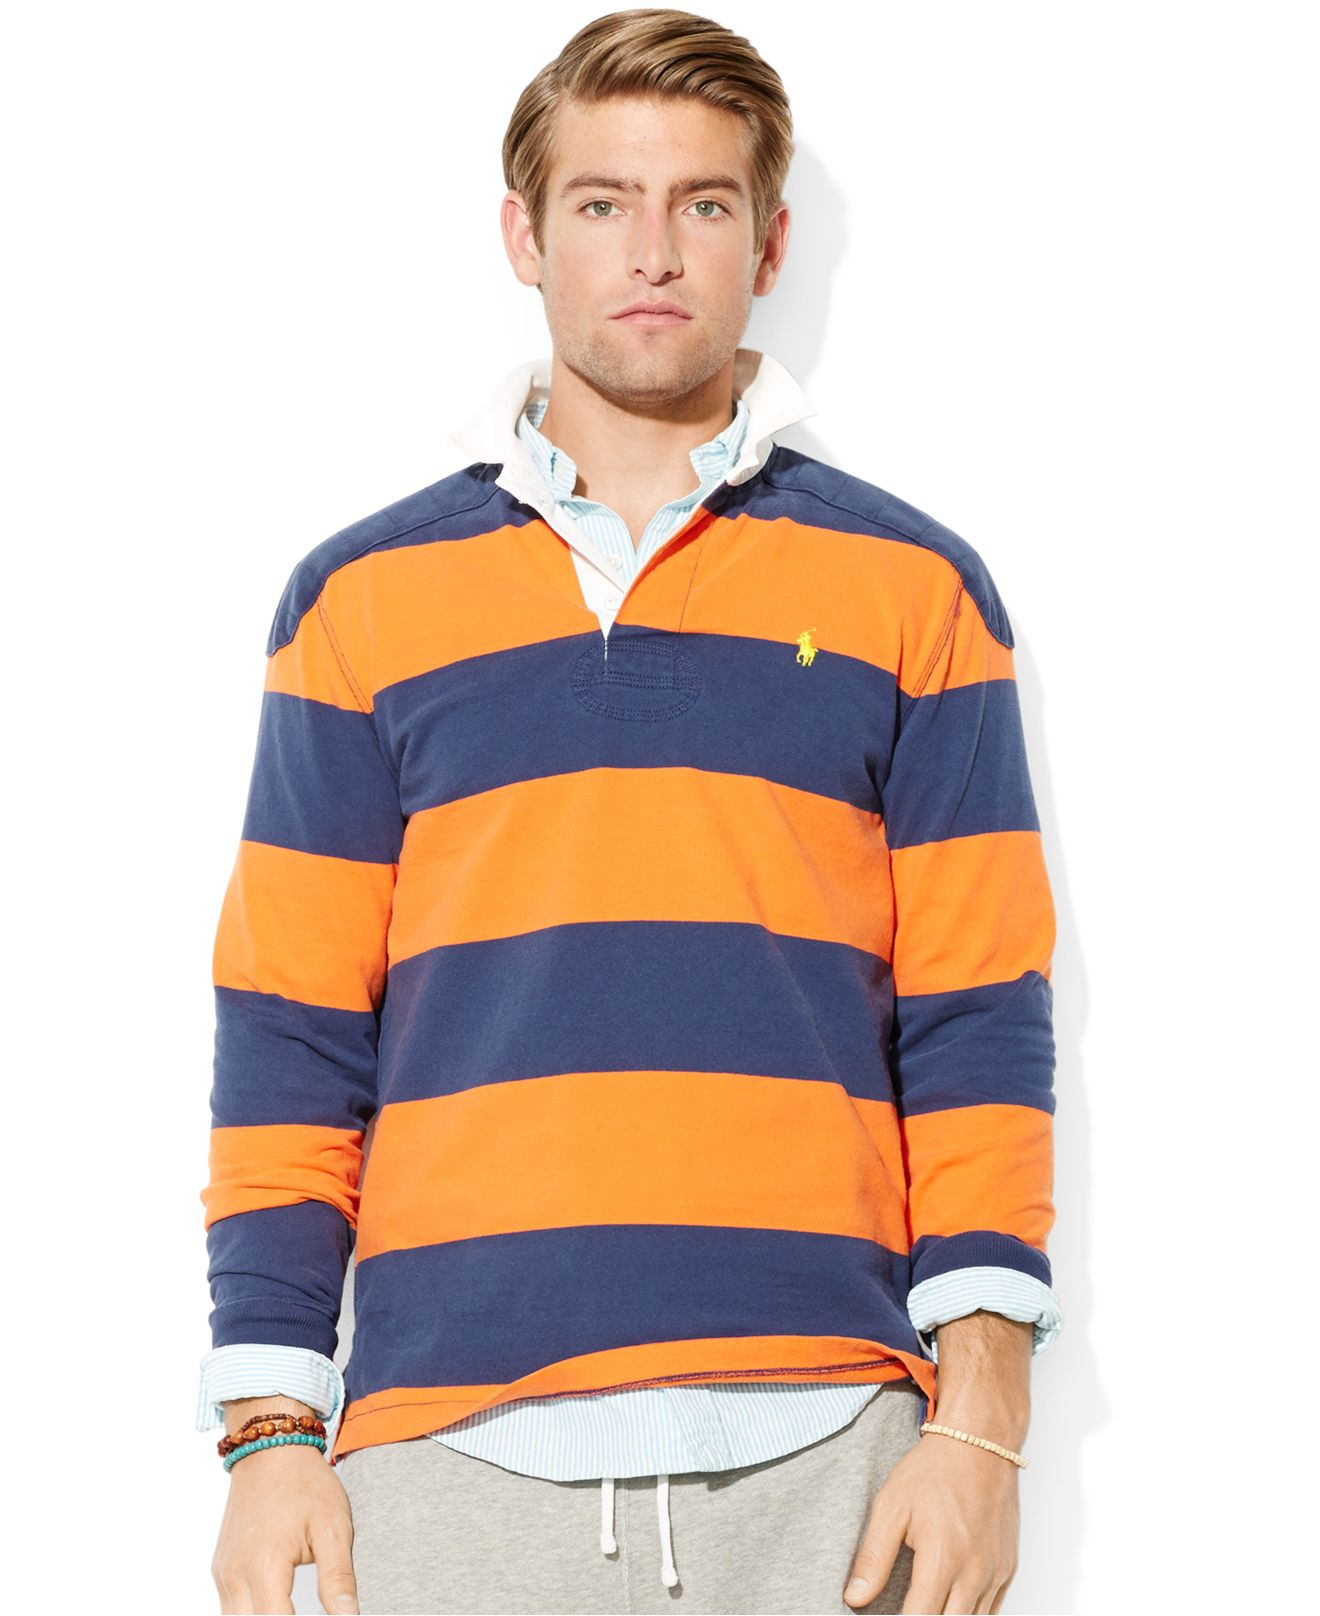 Polo Ralph Lauren Striped Rugby Shirt, Brown And Orange Rugby Shirt